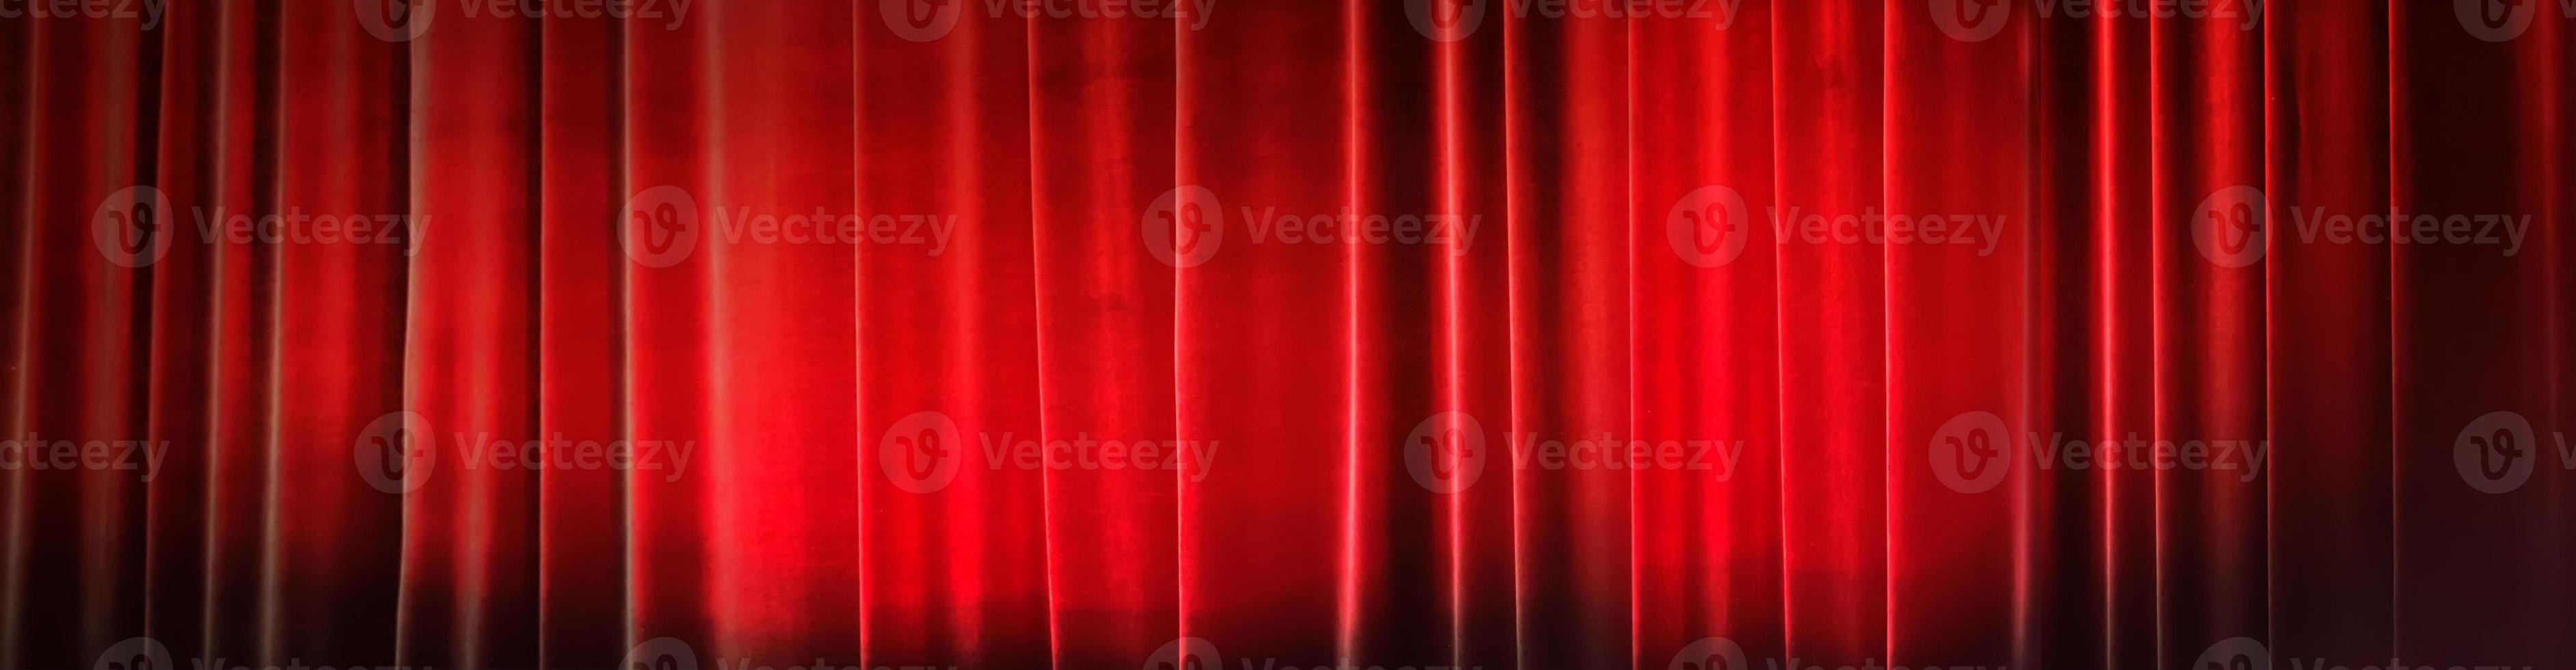 Banner background concert curtain red. Theater curtains. photo